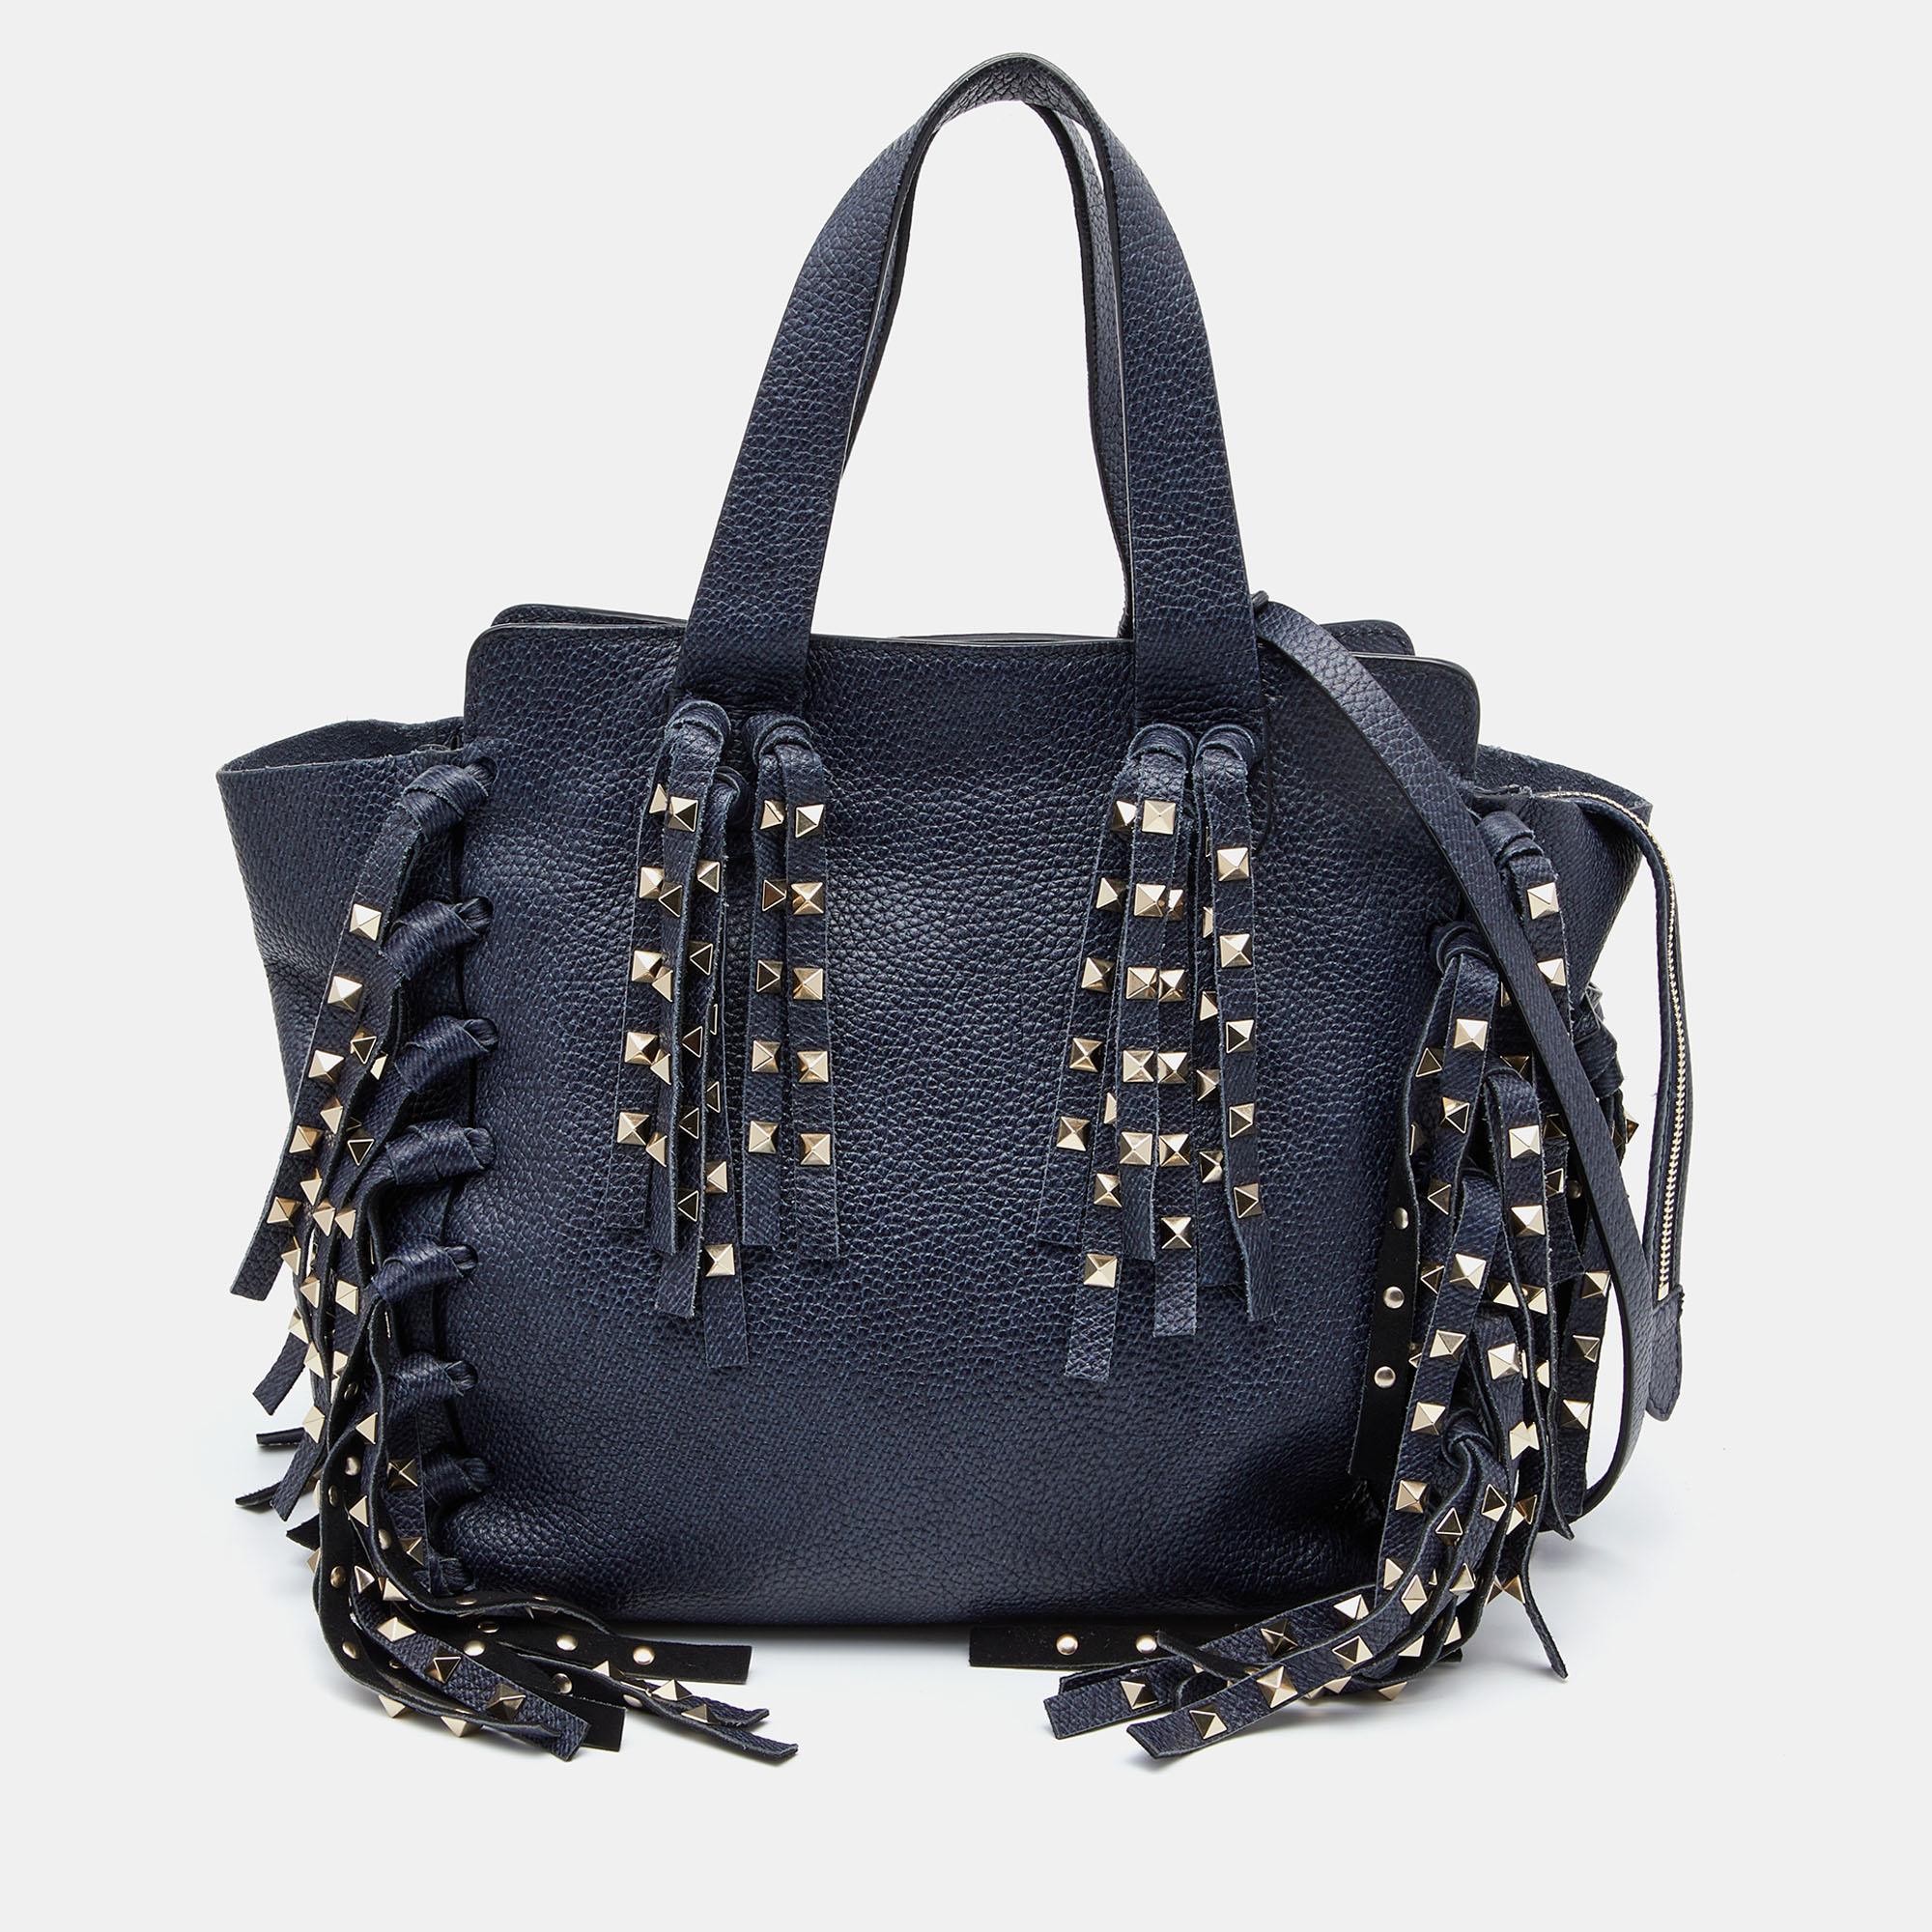 Every modern day wardrobe needs a Valentino tote like this. Get this beautiful leather bag featuring a lovely touch of fringe details covered with the signature Rockstuds. It is complete with a capacious interior that can easily house your belongings. Pair this remarkable piece with dresses and coats.